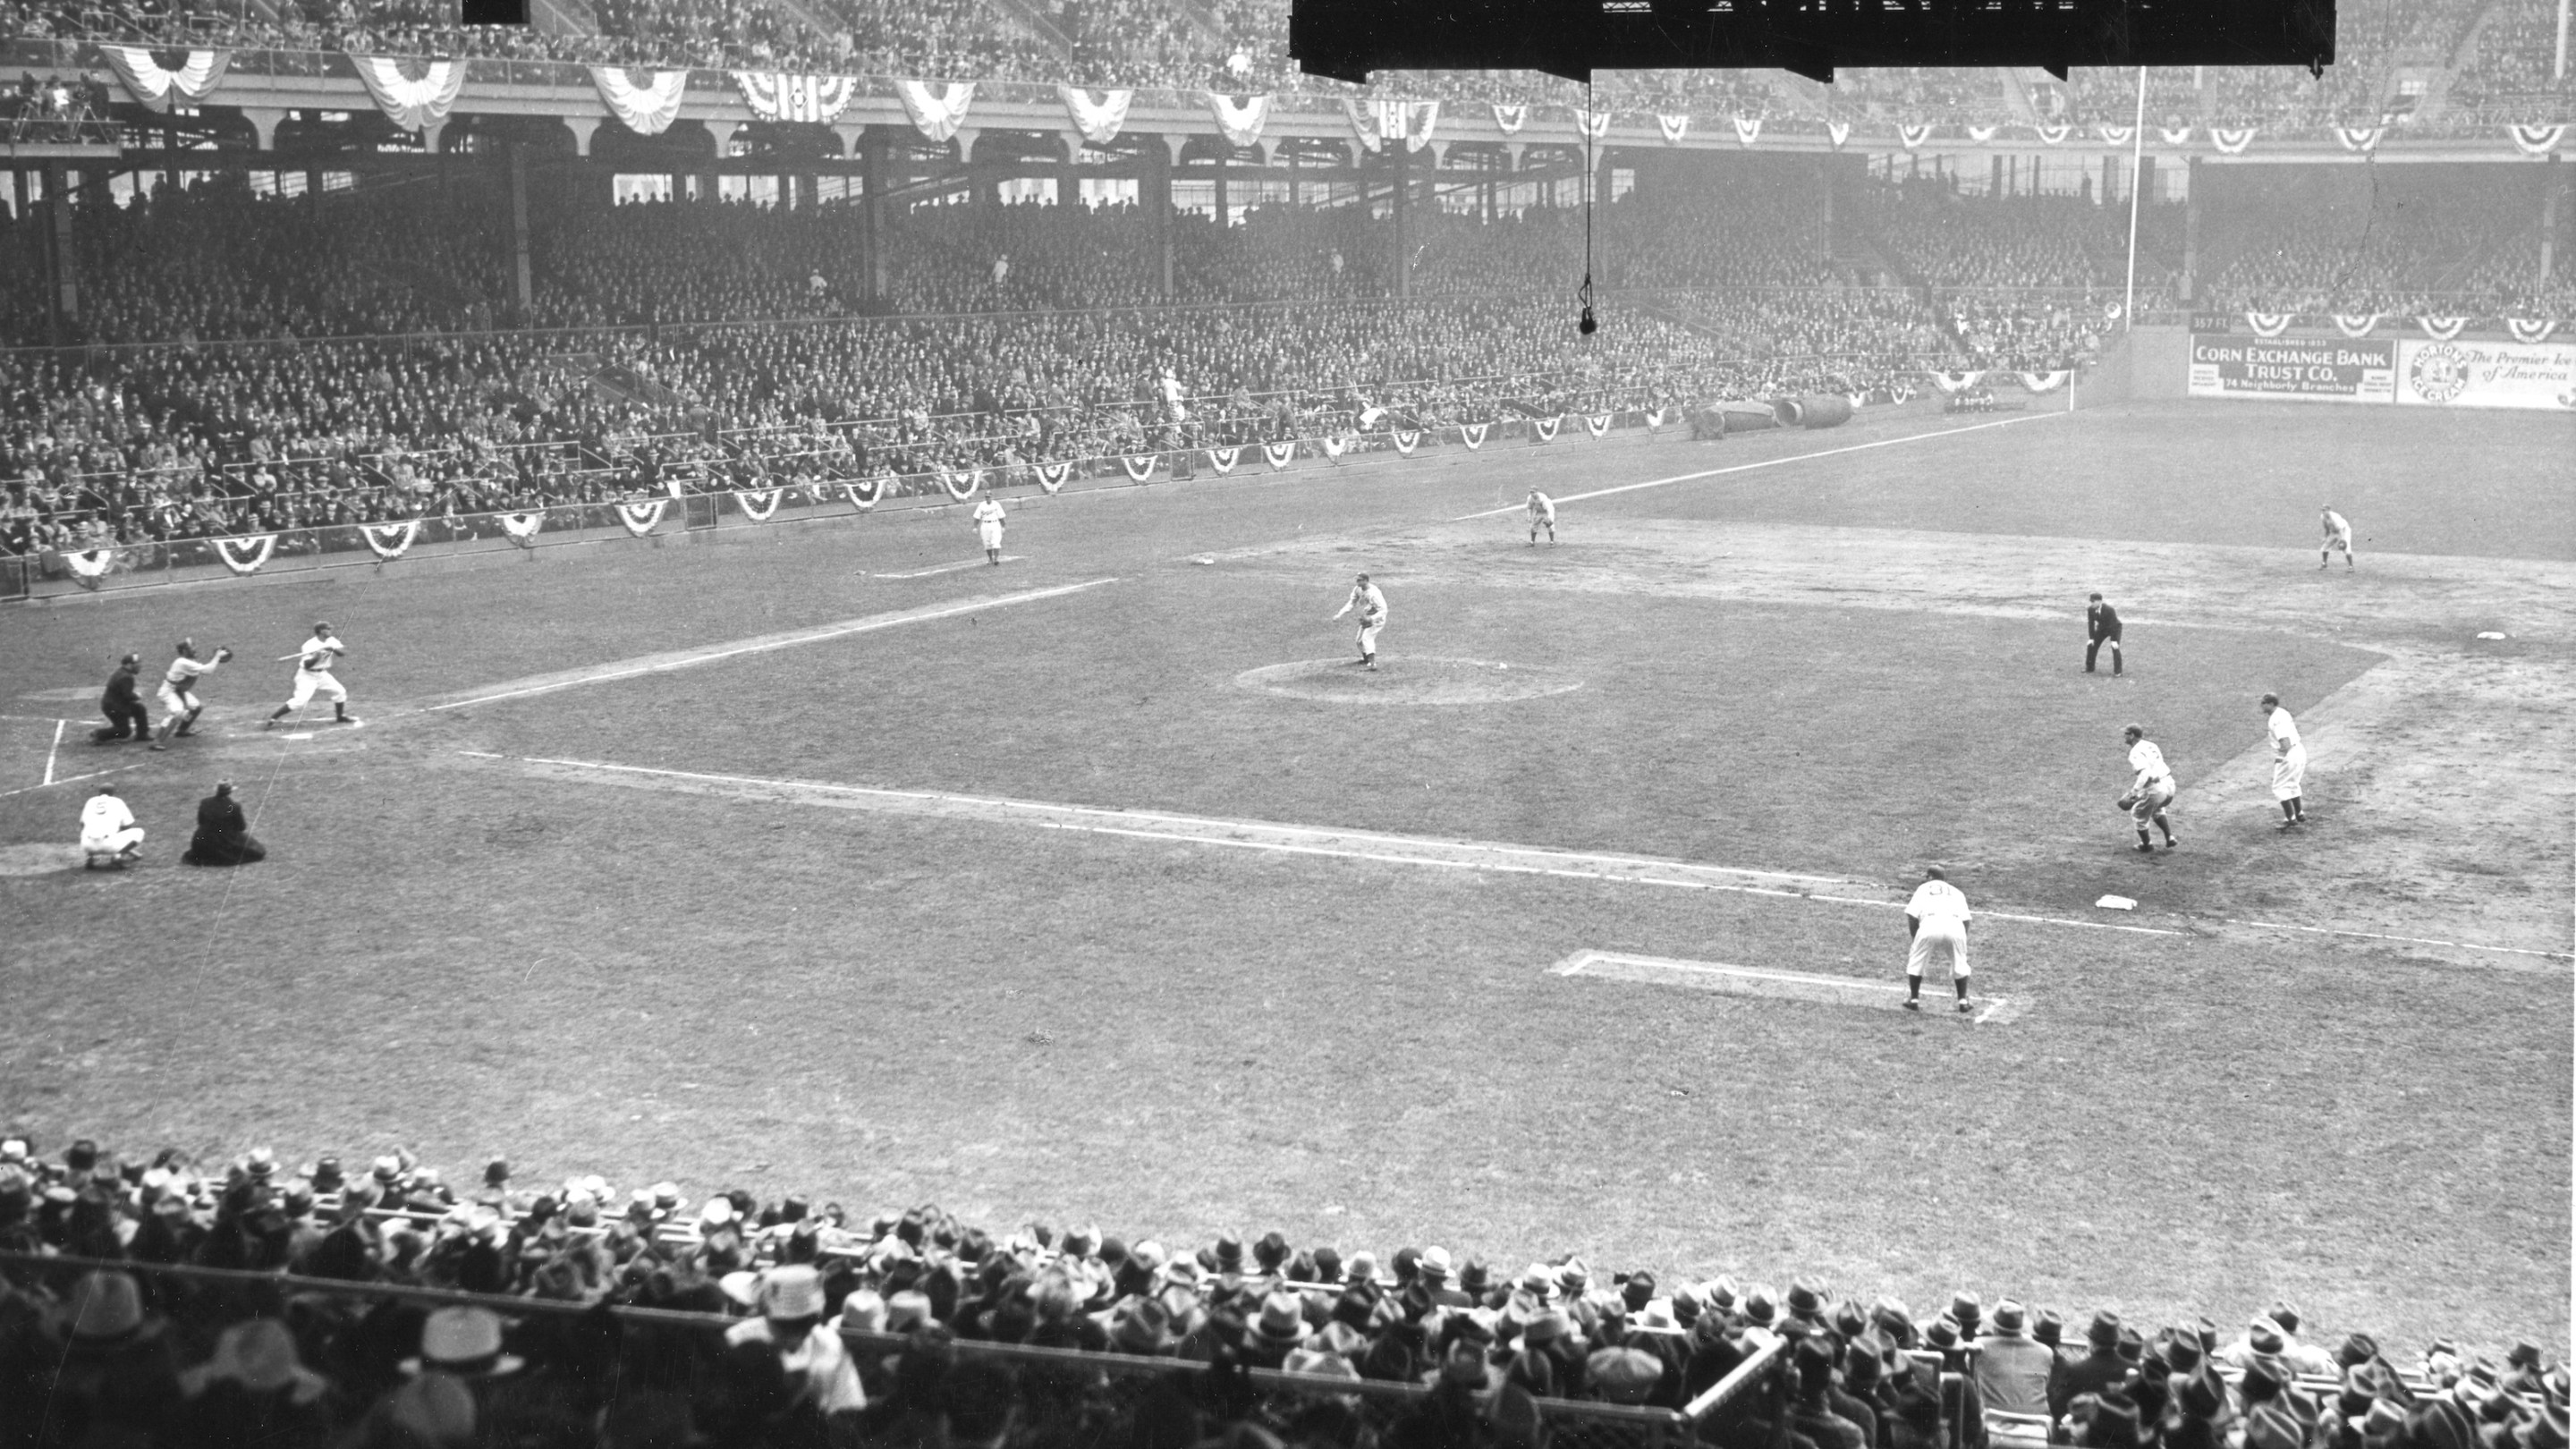 View from seats on the first-base side of Ebbets Field as the New York Giants and the Brooklyn Dodgers opened the 1939 baseball season, Brooklyn, New York, New York, 1939.